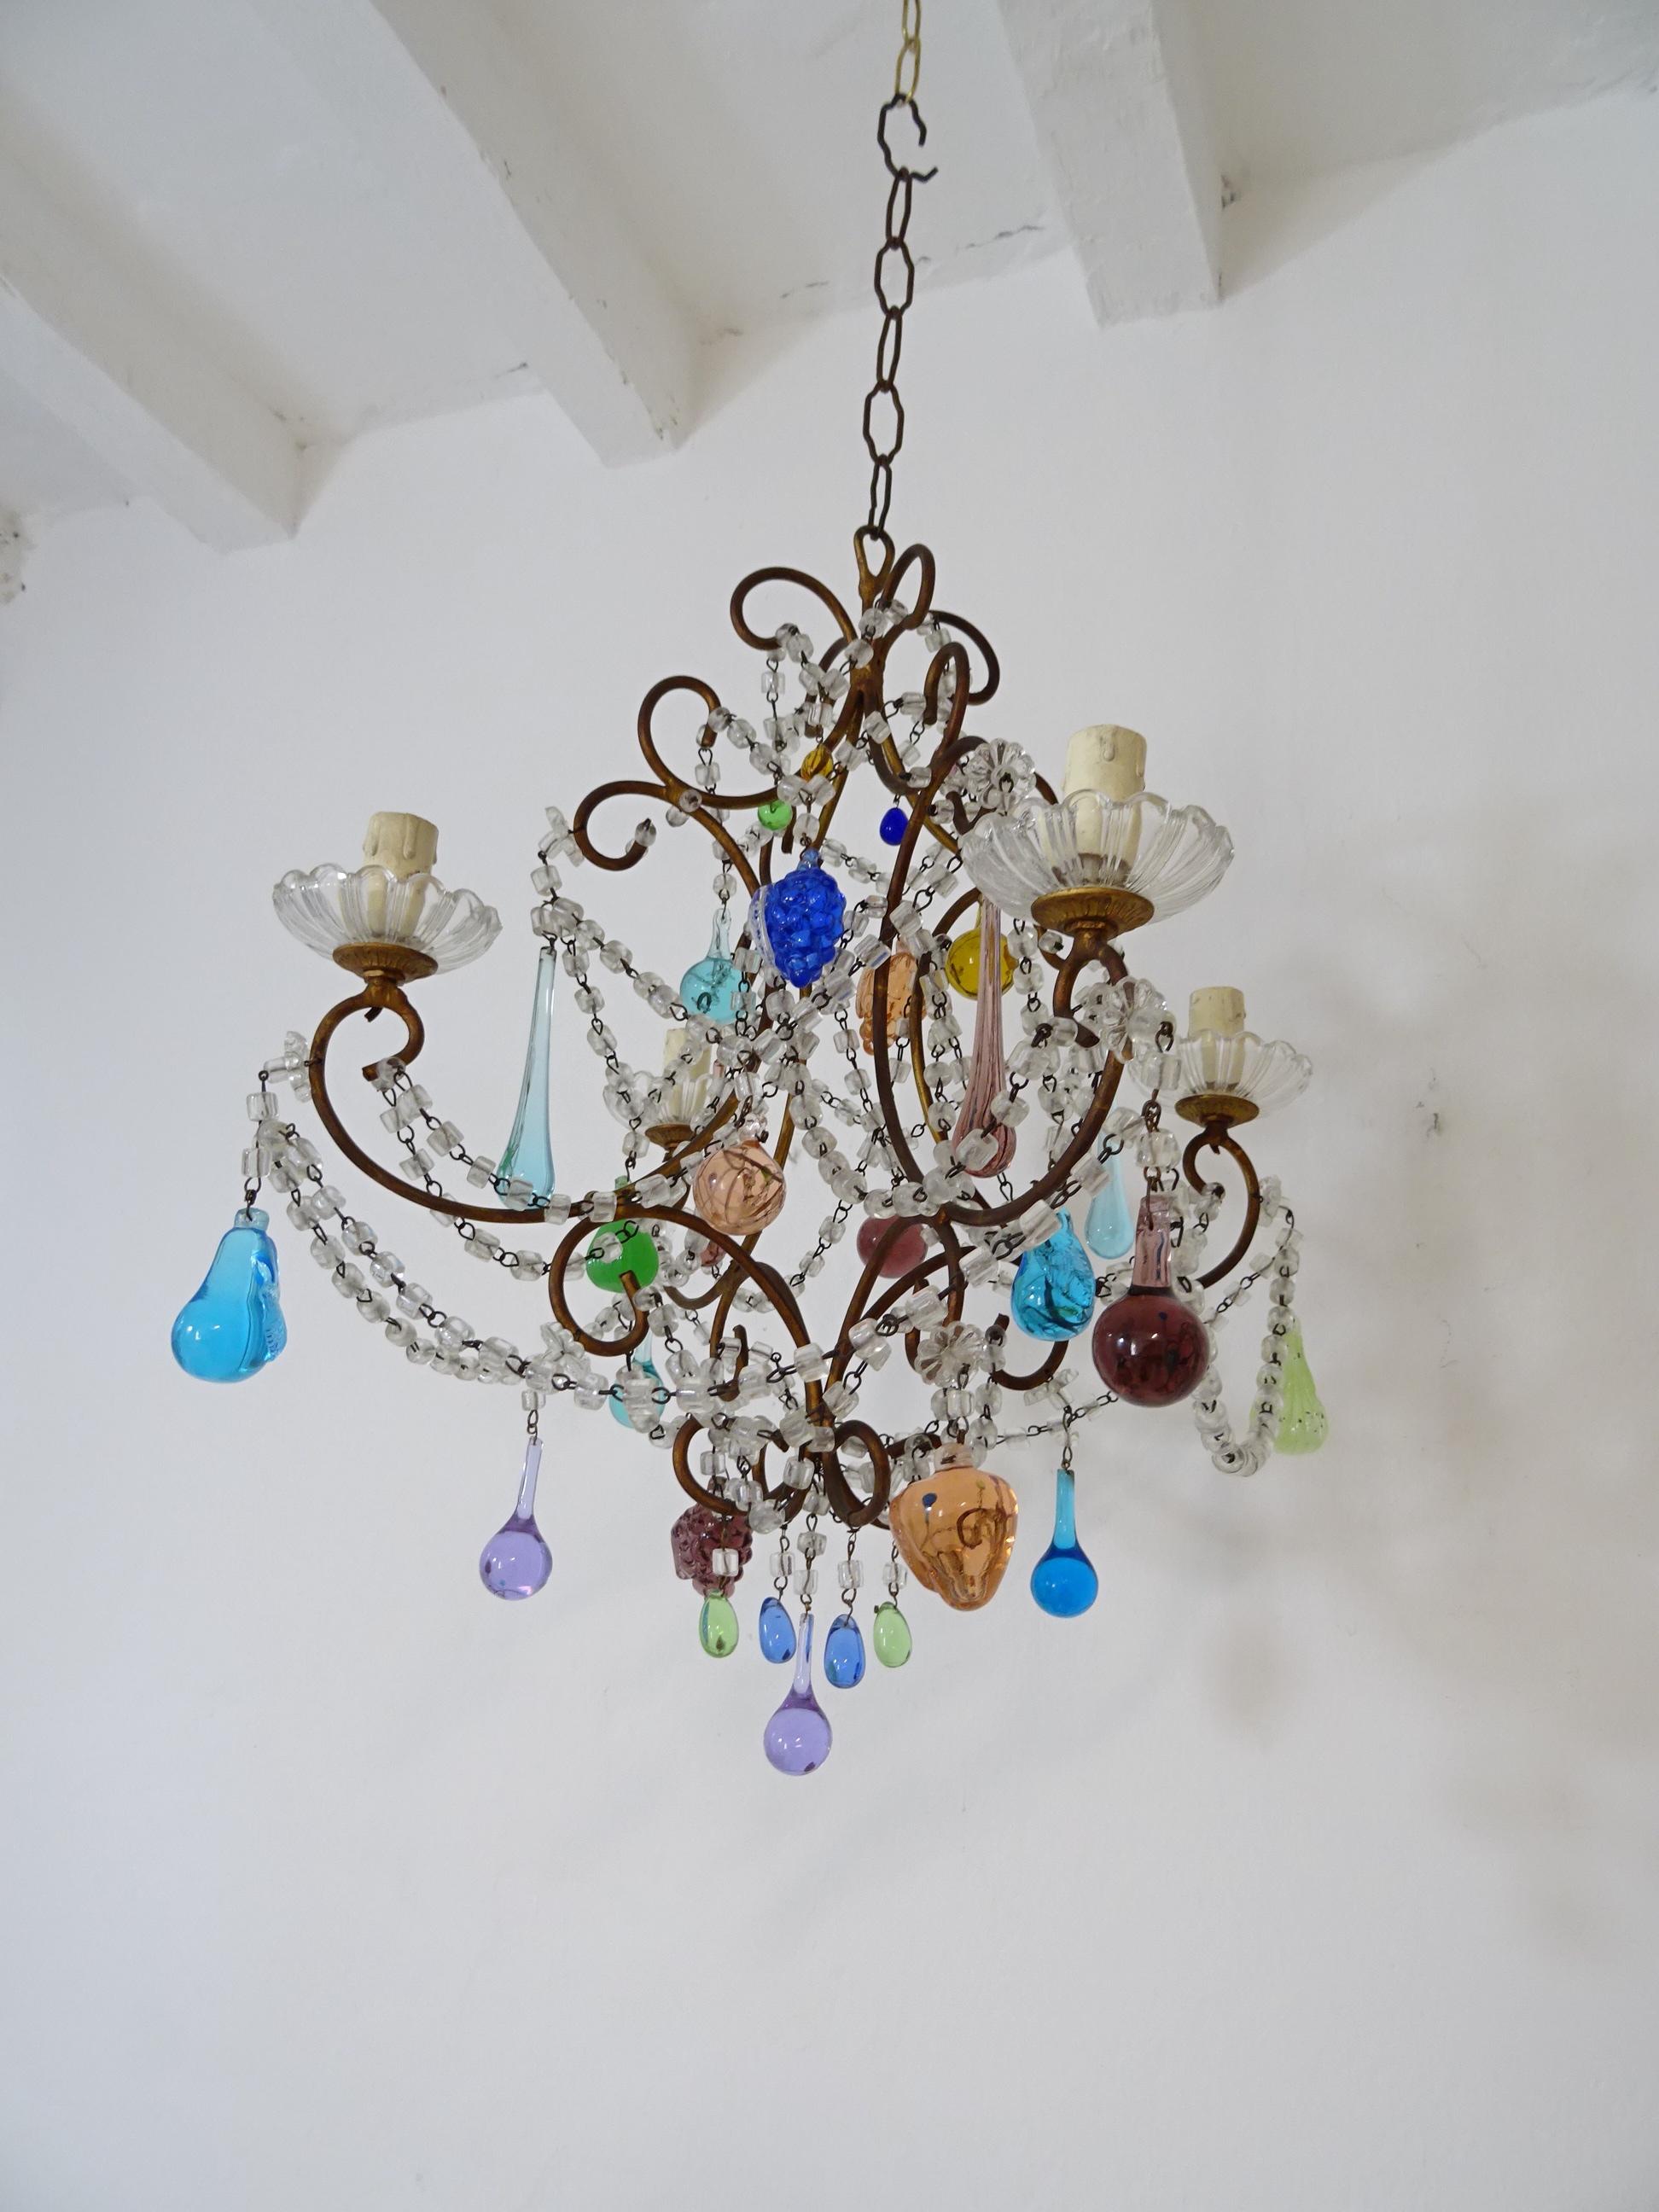 Housing 4 lights sitting in crystal bobèches. Swags of crystal macaroni and florets throughout with Murano fruit and drops in all shapes, colours and sizes. Adding 10 inches of original chain and canopy. Will be re-wired with certified UL US sockets